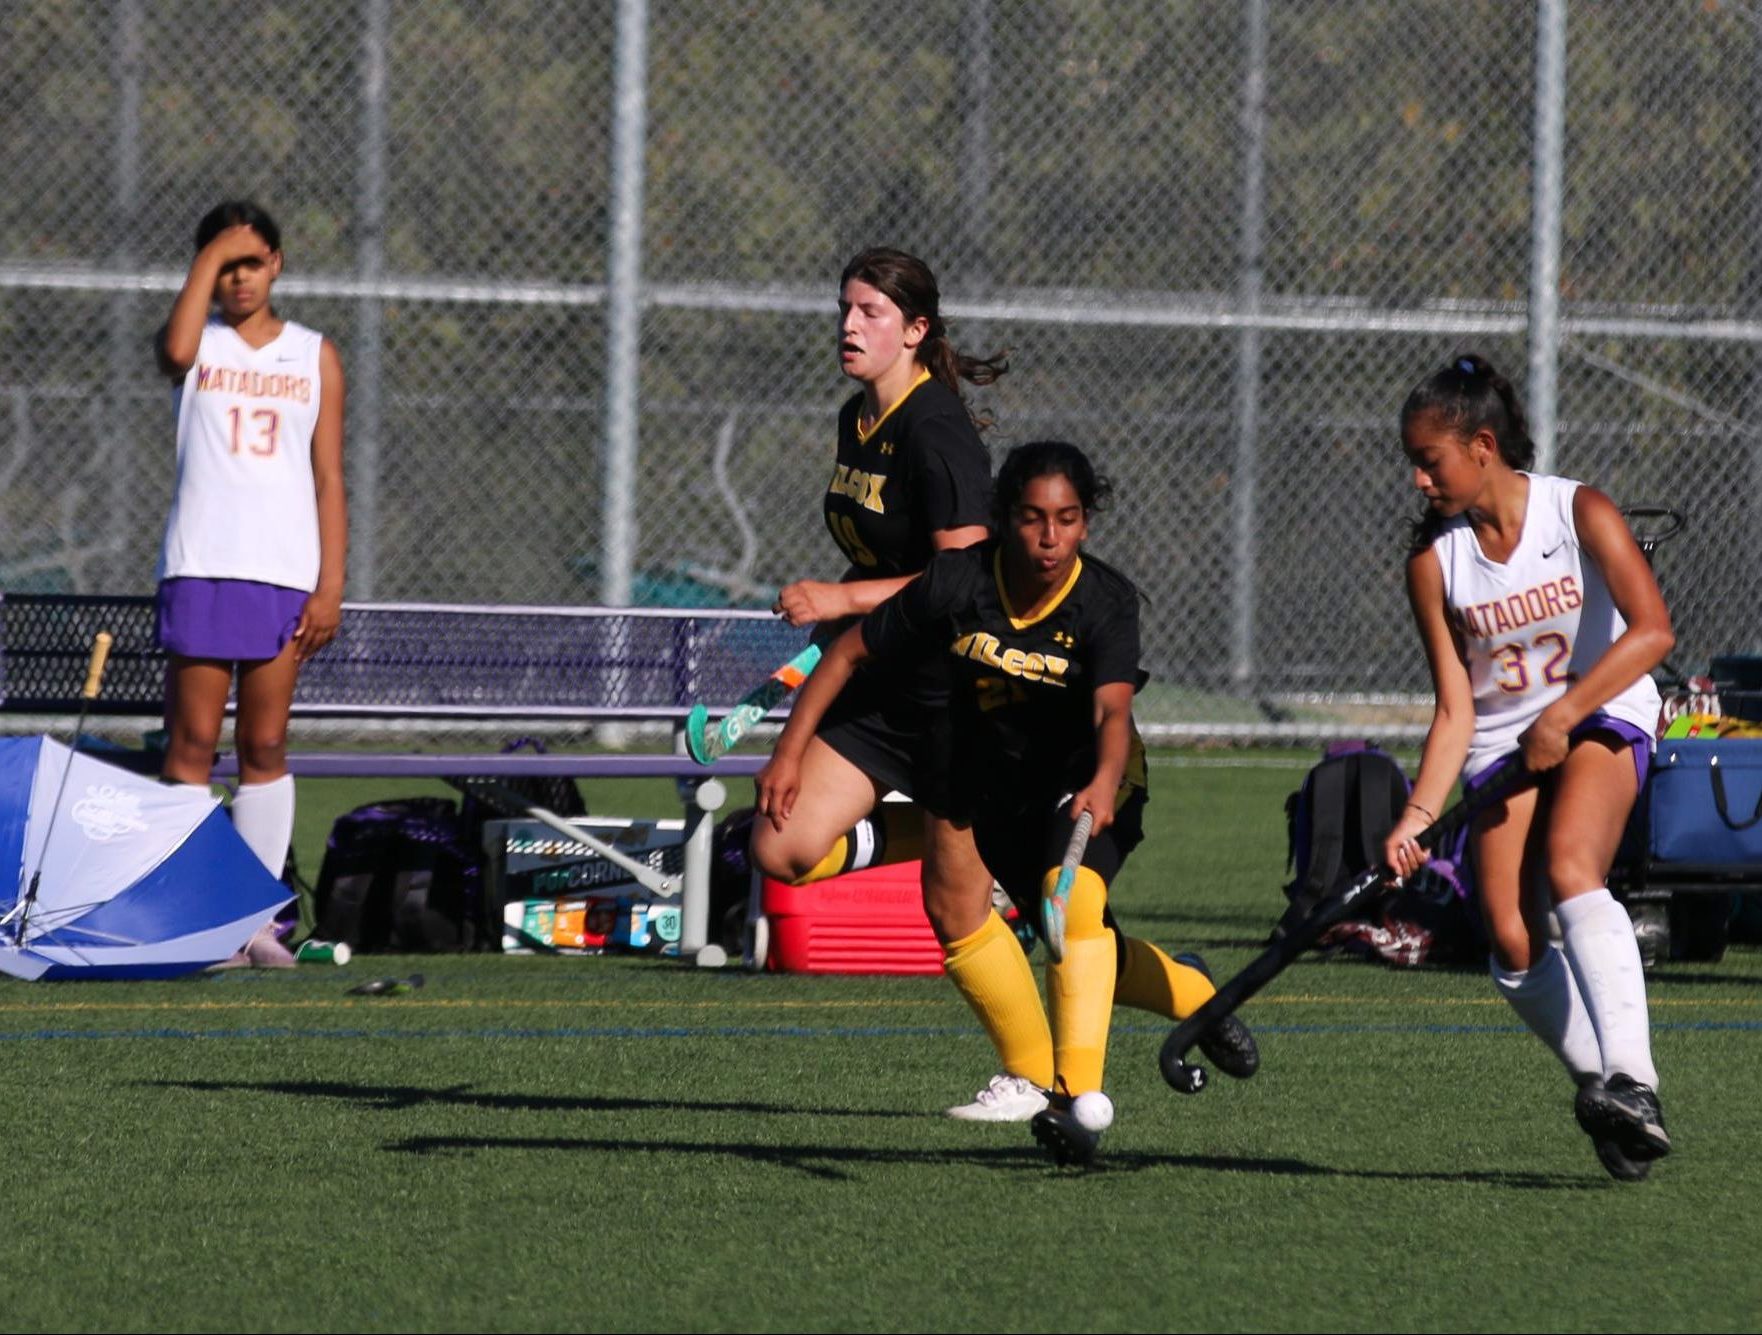 Sophomore Monisha Preetham attempts to gain possession of the ball from an opponent.